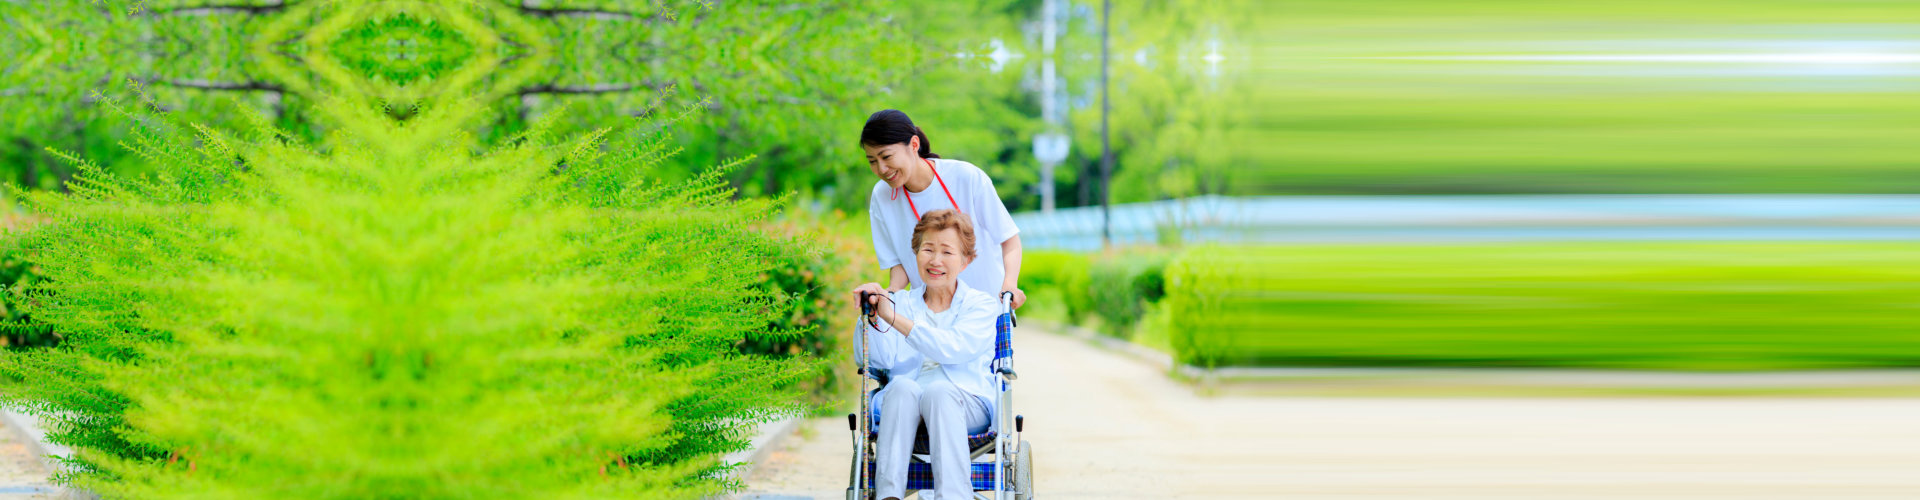 caregiver and senior woman strolling